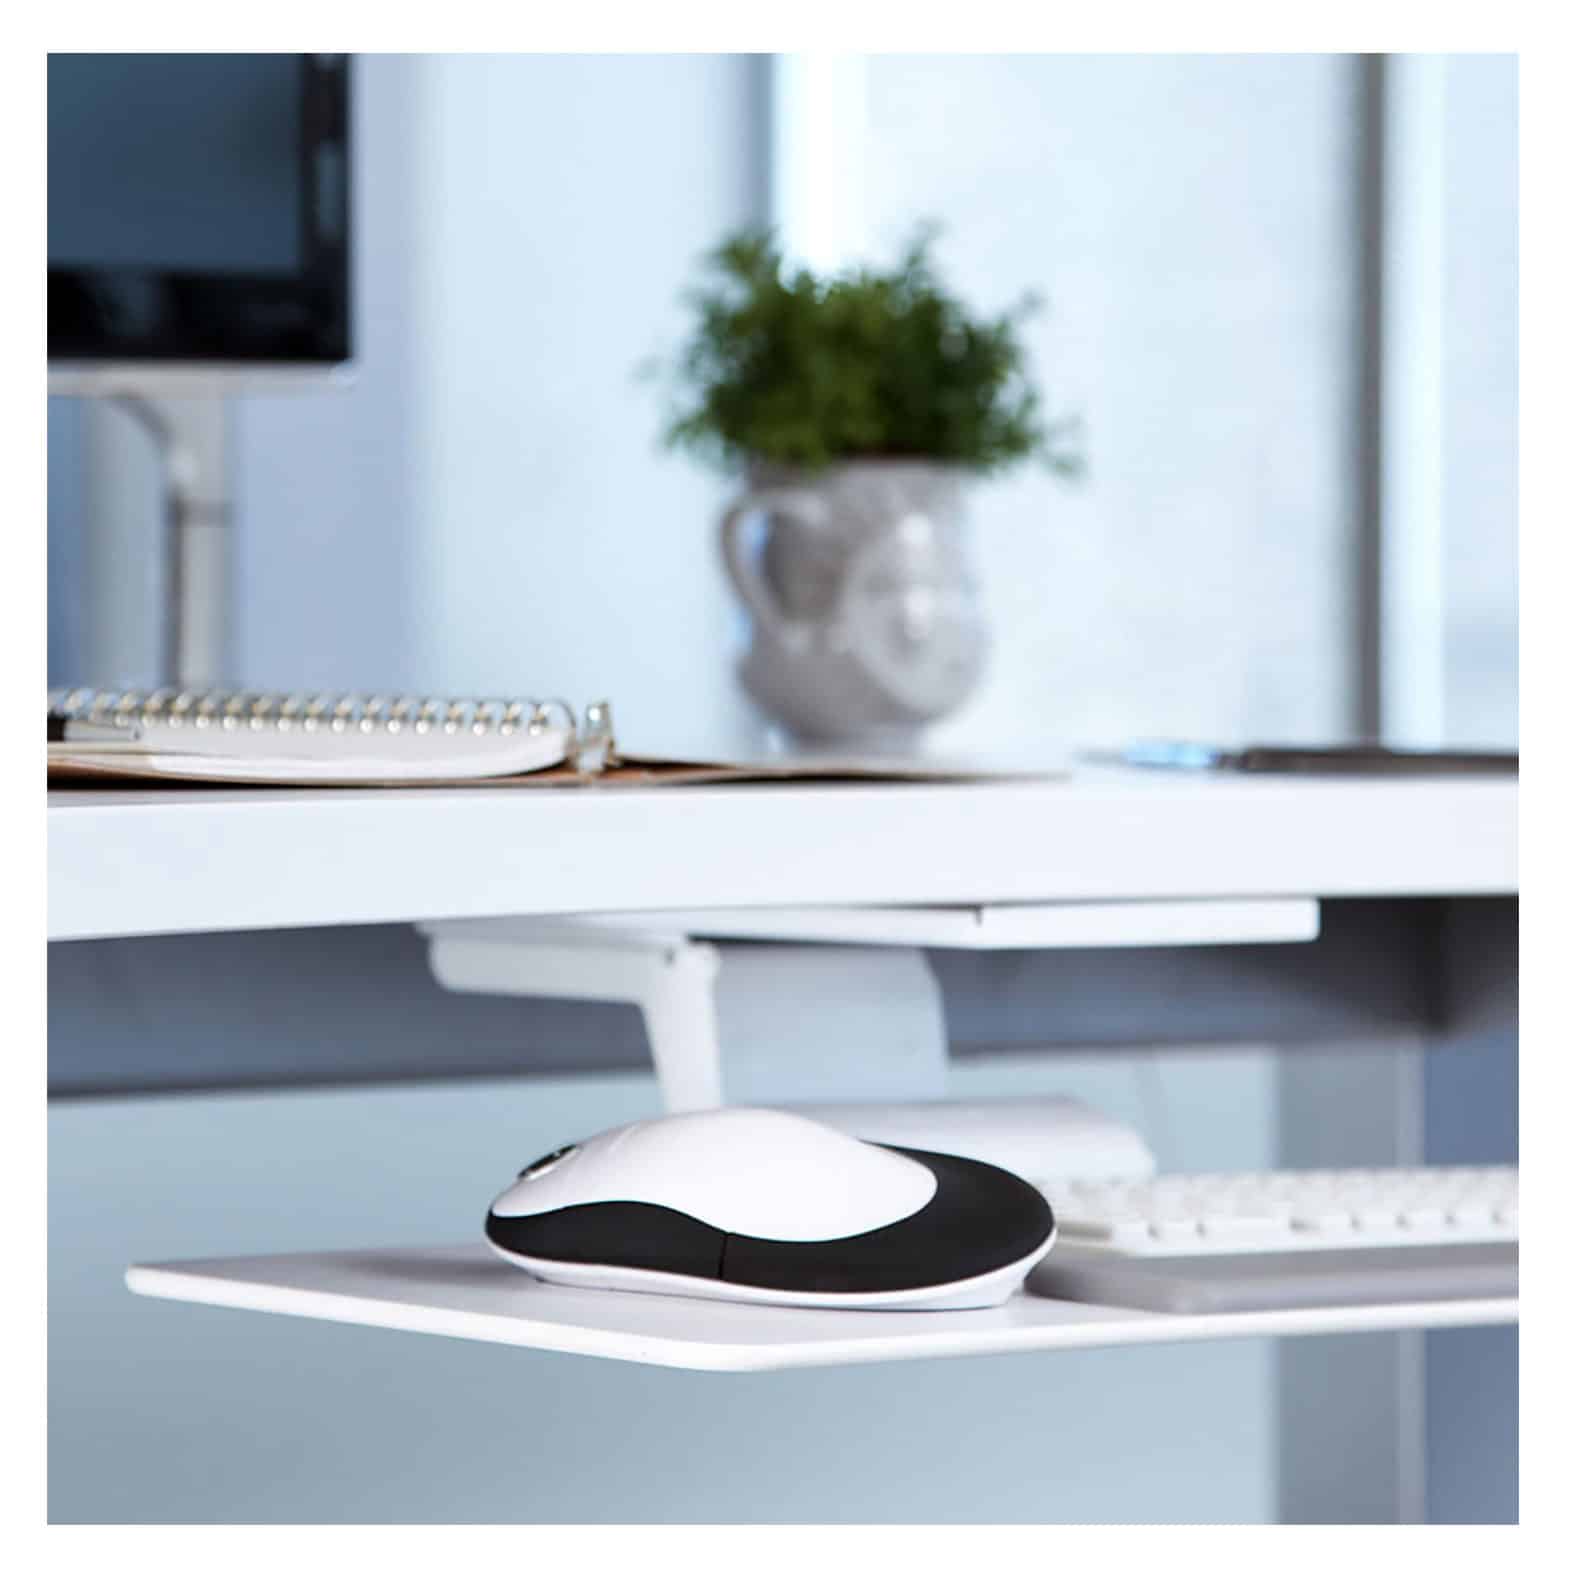 Humanscale's ergonomic mouse relieves wrist strain